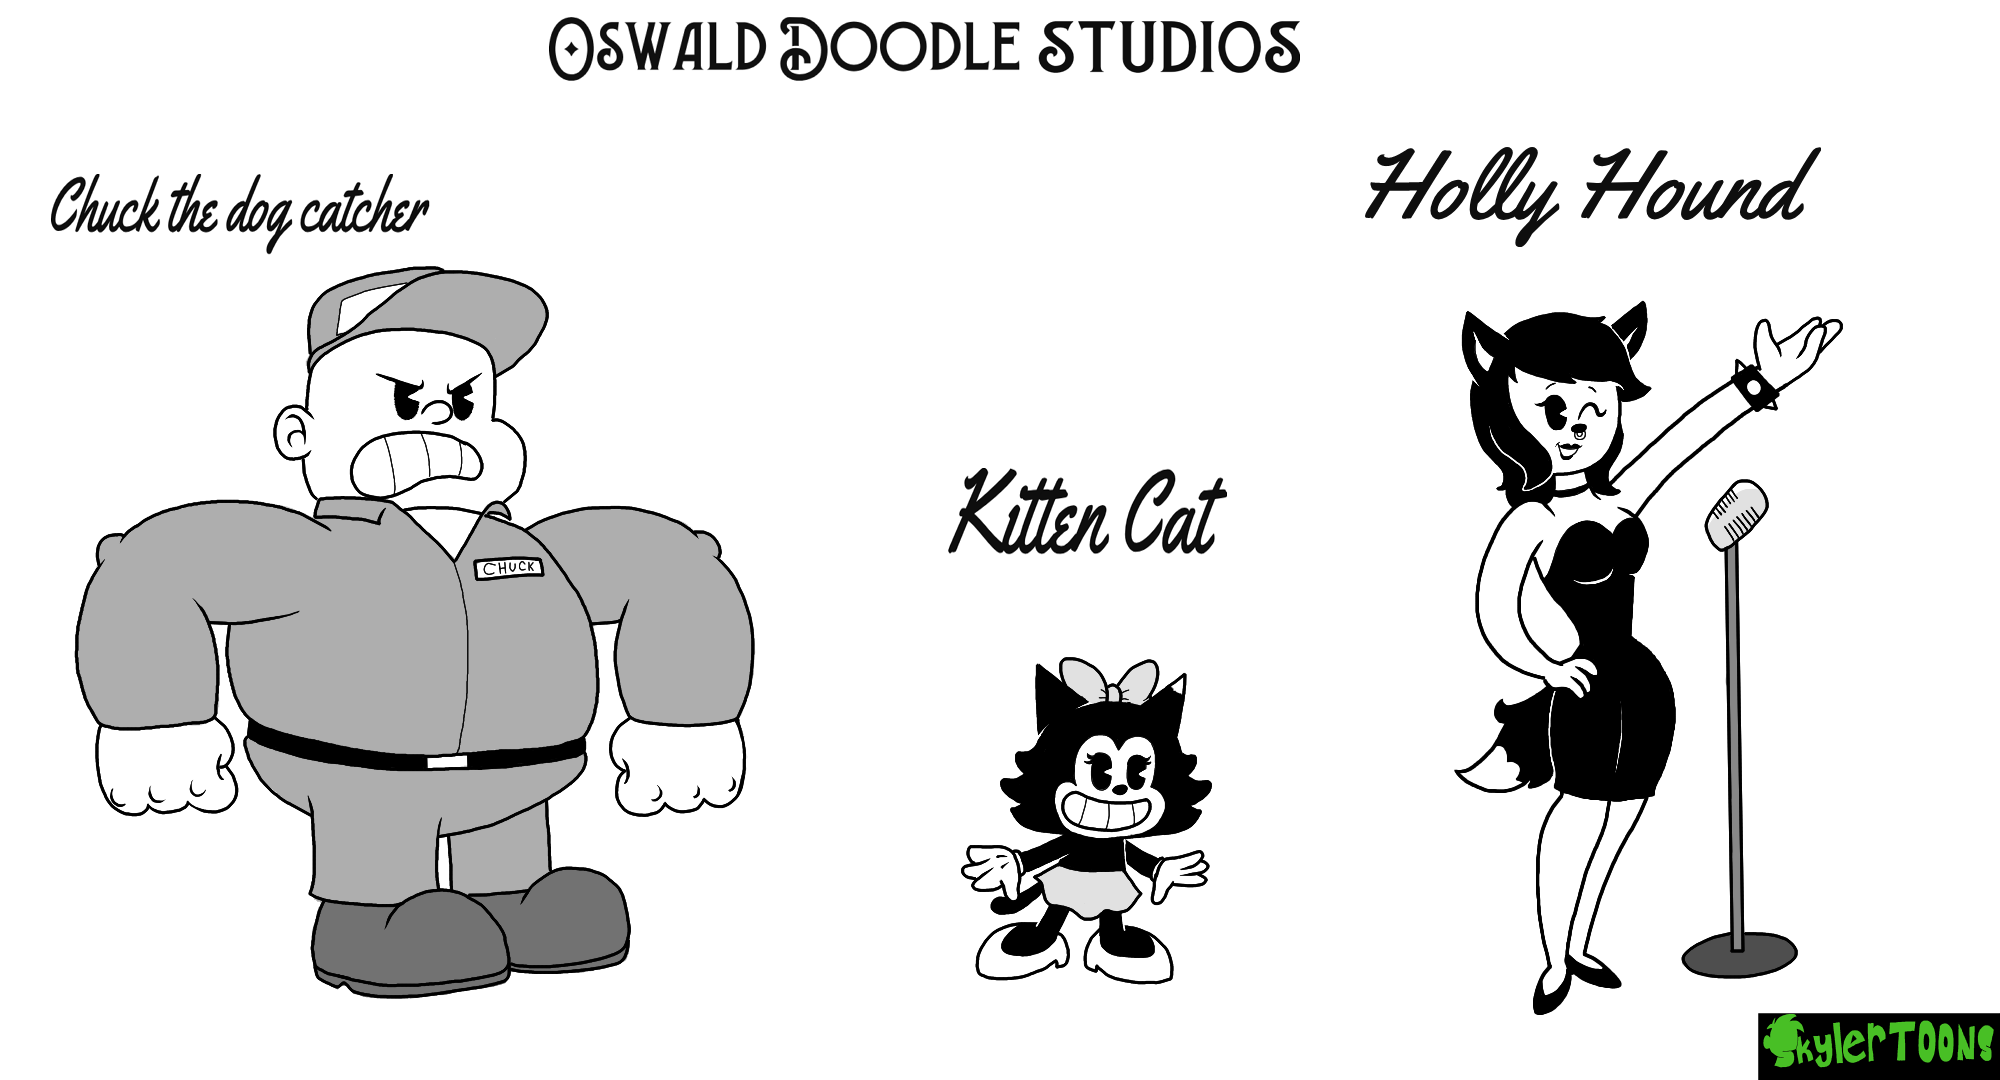 more characters from Oswald Doodle by skylertoons on DeviantArt